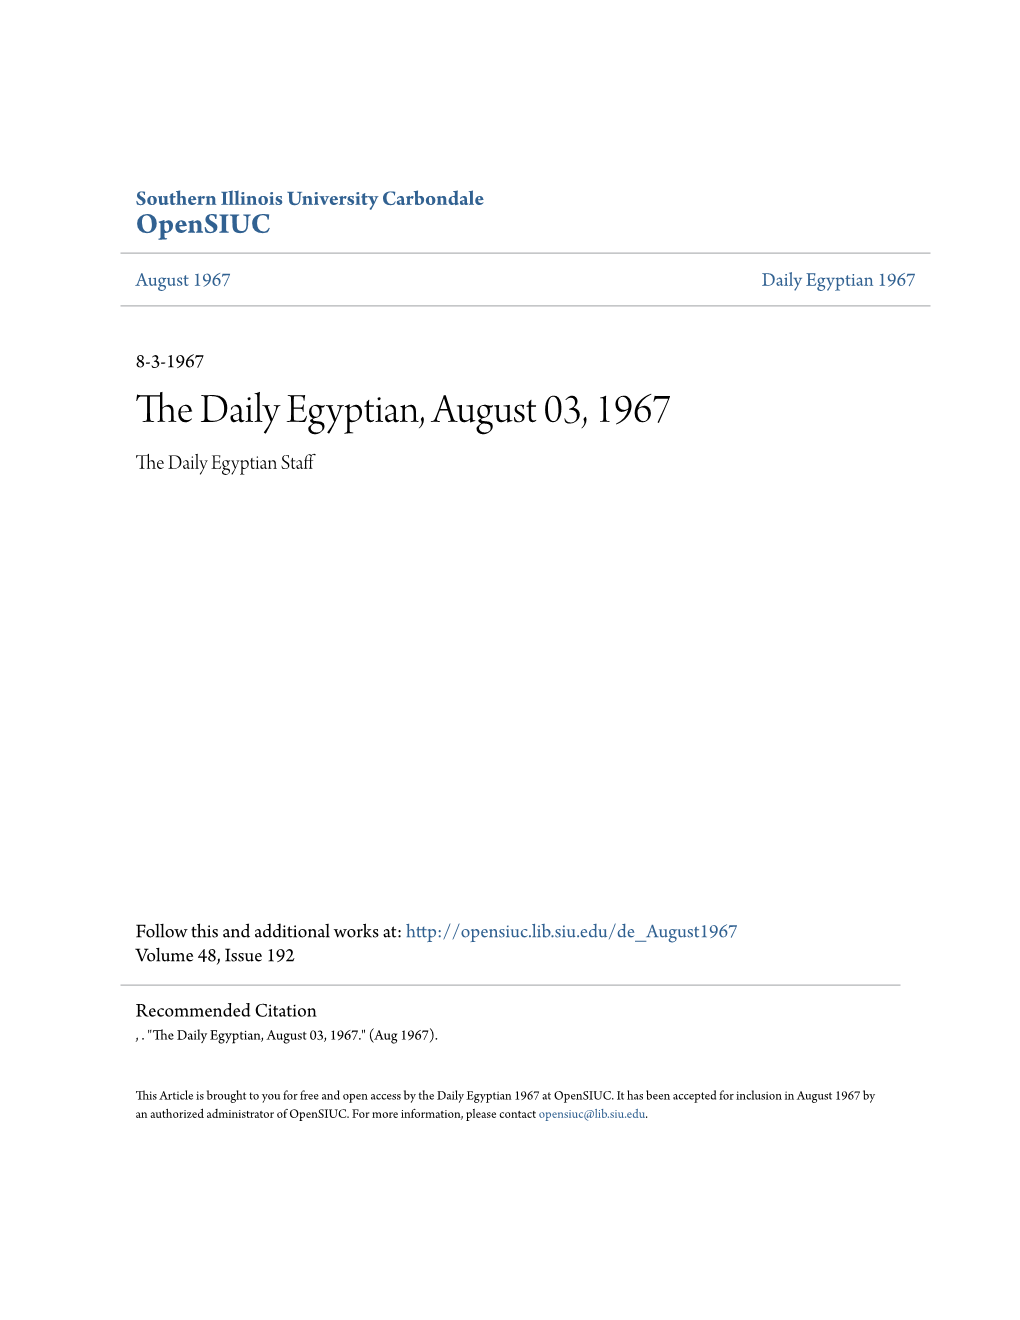 The Daily Egyptian, August 03, 1967